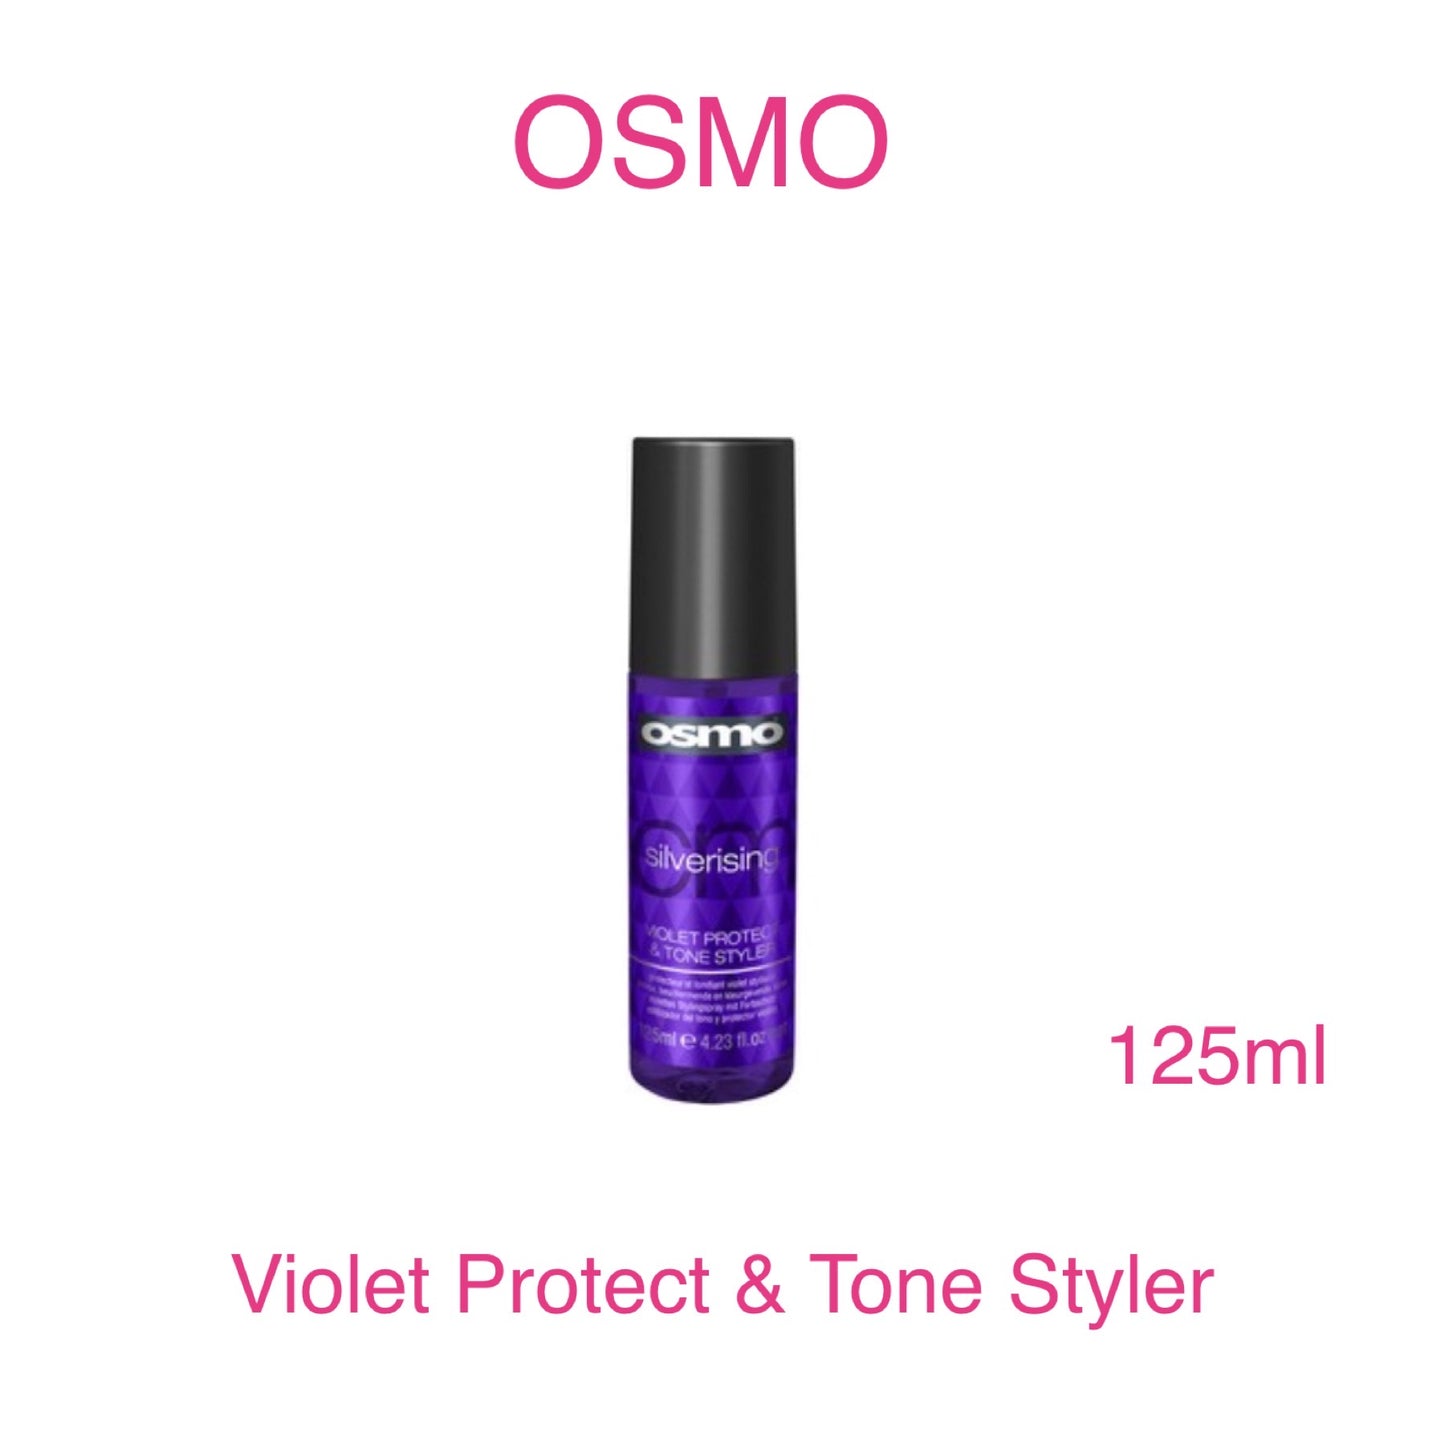 Osmo Silverising Violet Protect & Tone Styler (125ml)